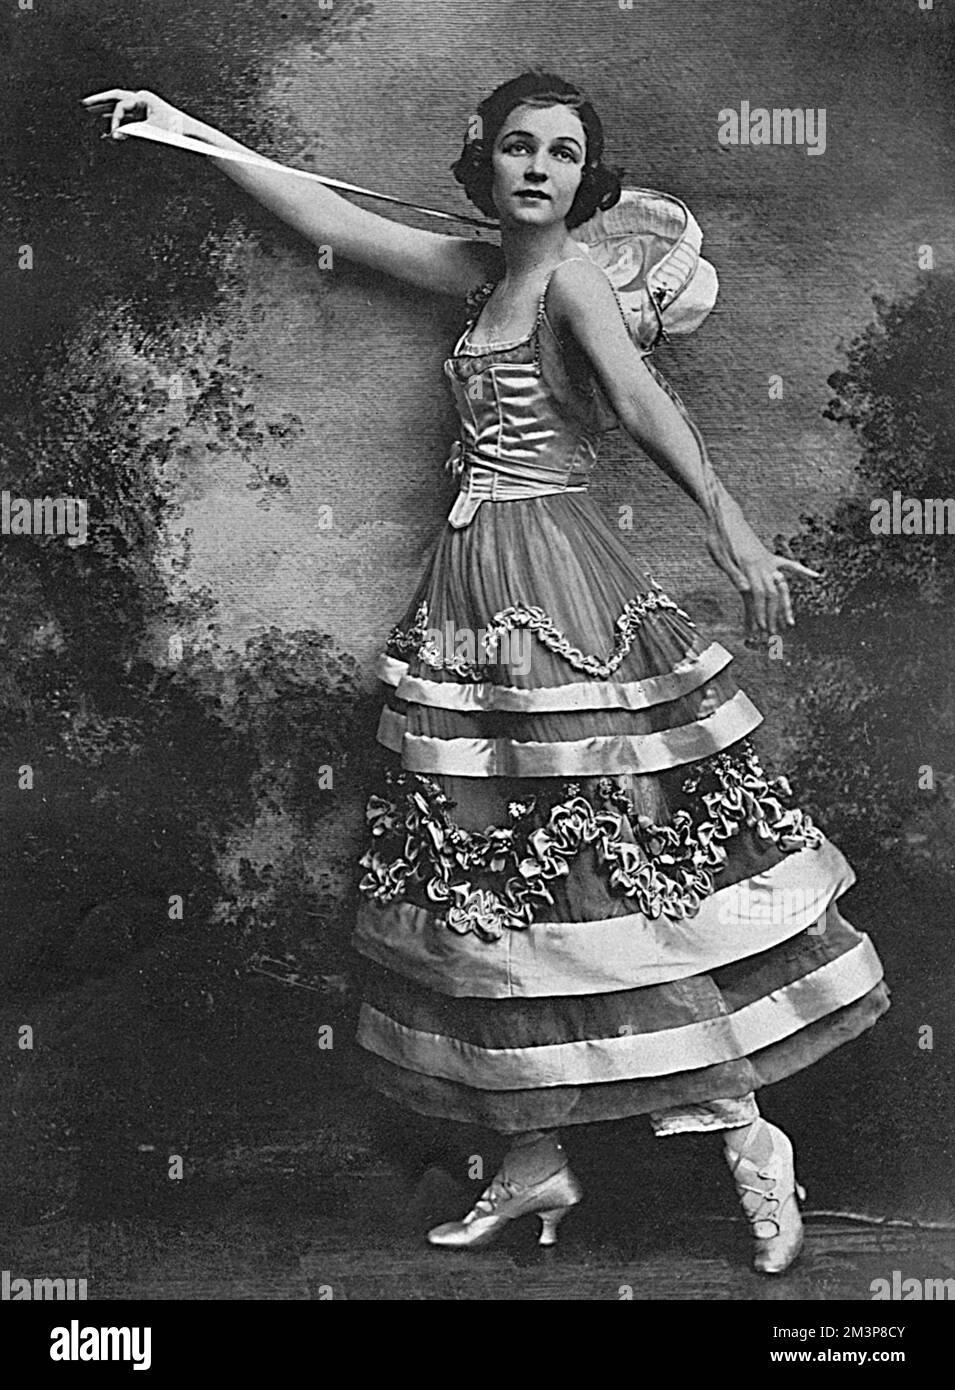 IRENE CASTLE (nee FOOTE) Dancer, with her husband Vernon Castle known as 'America's Dancing Sweethearts'.  The pair were incredibly successful and their earnings were high.  And as a leader of fashion, Irene lent her name to a variety of hats, lace, dresses and toiletries bearing her name.  Pictured at the time her husband had joined the Royal Flying Corps, and the couple were taking London by storm after their performance in the famous Serbian Relief Fund matinee.     Date: 1916 Stock Photo